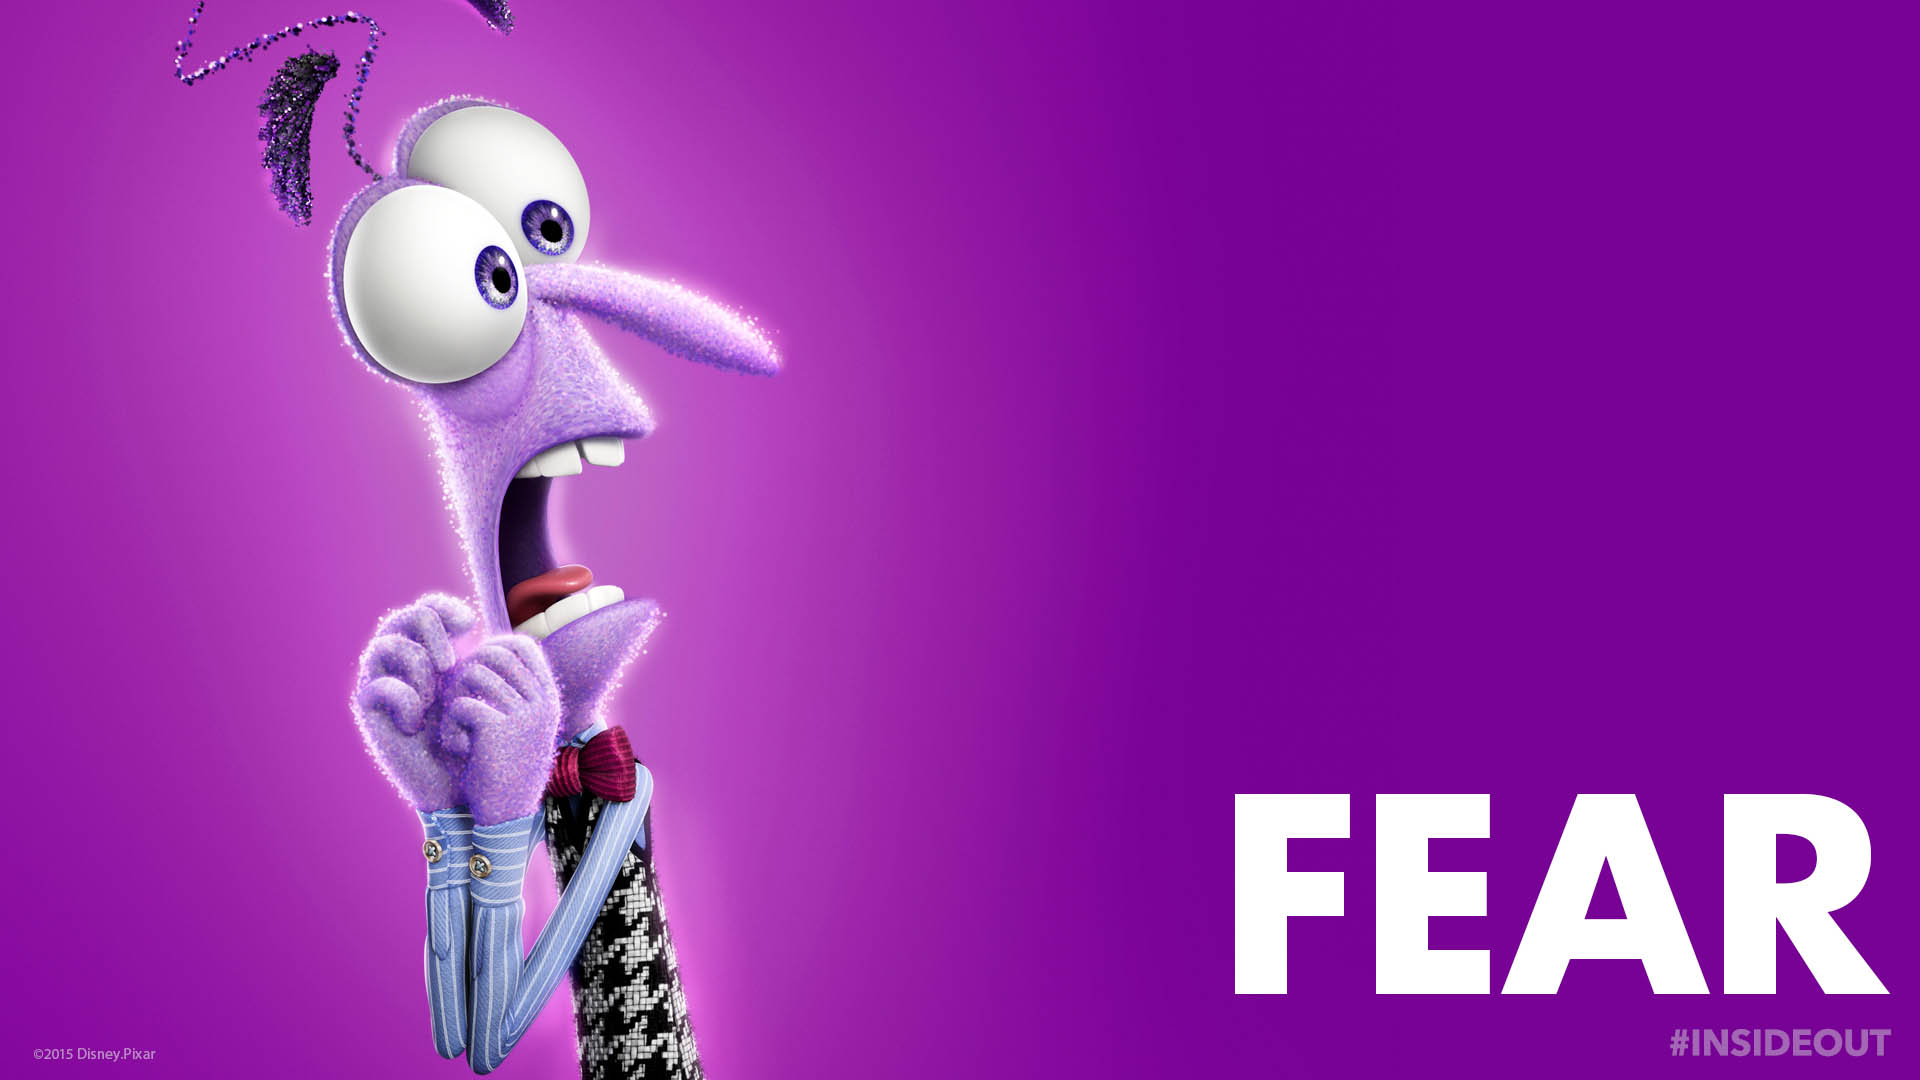 Inside Out character Fear   Disney Pixar   1920x1080 1920x1080